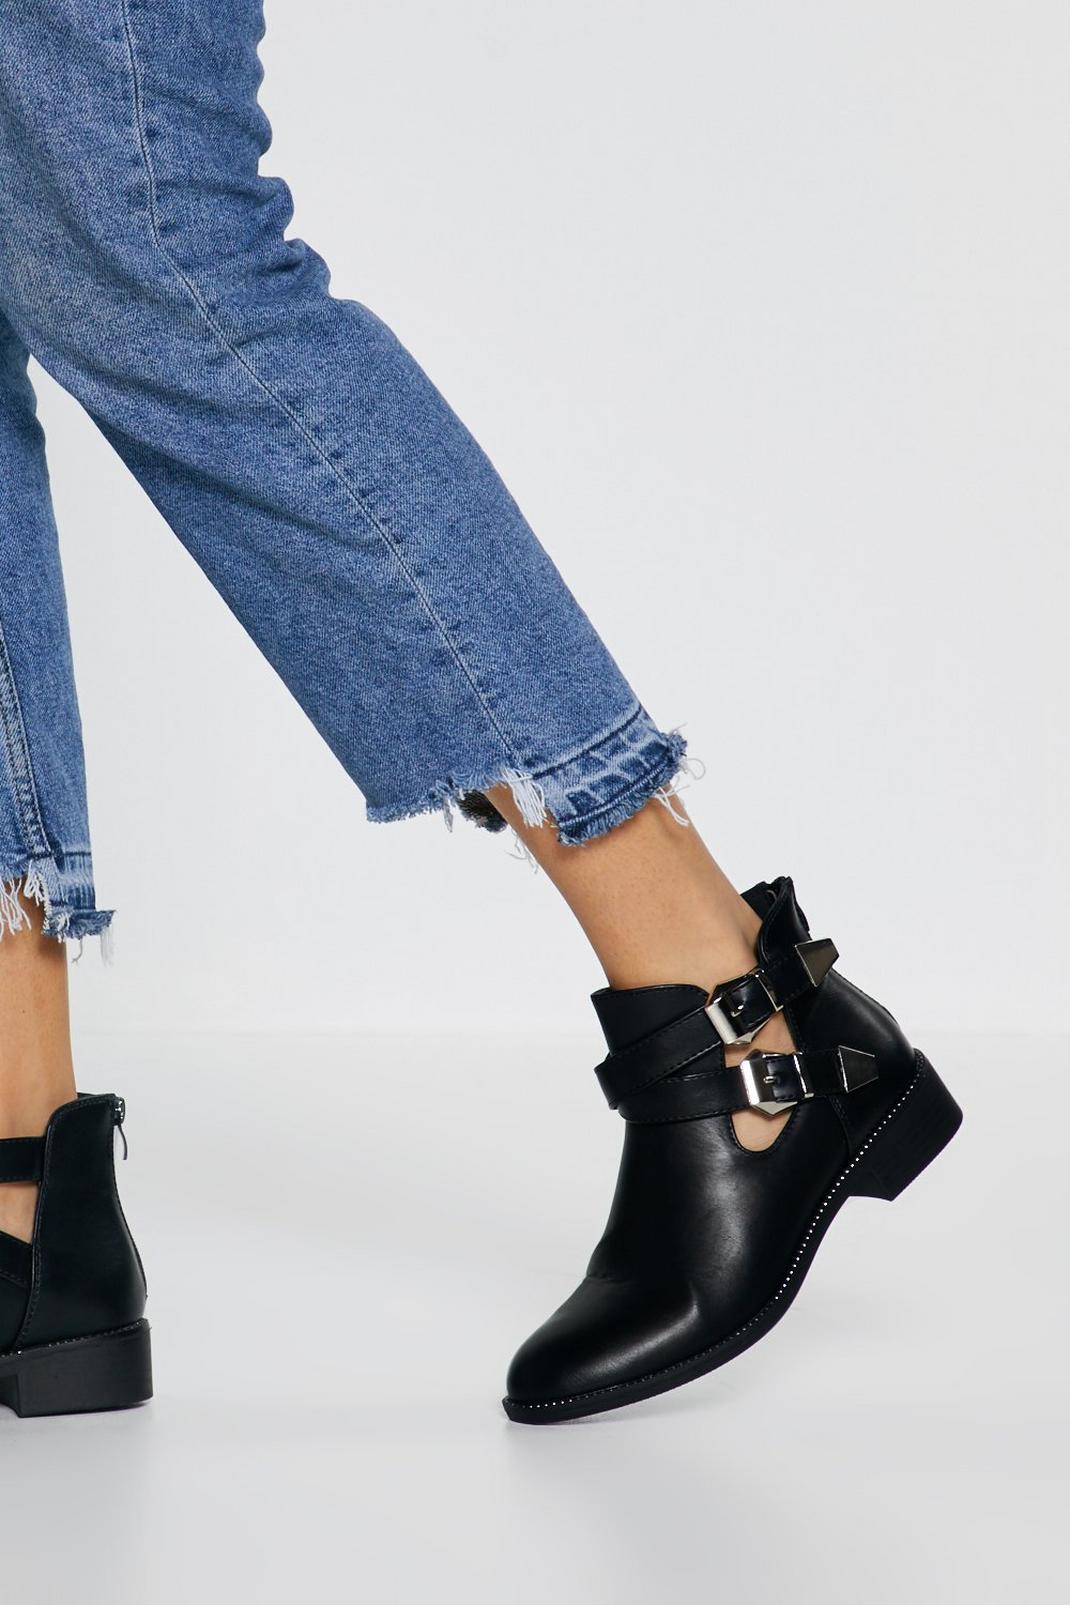 Tranquility Nebu Grader celsius Cut Out Ankle Boots | Nasty Gal